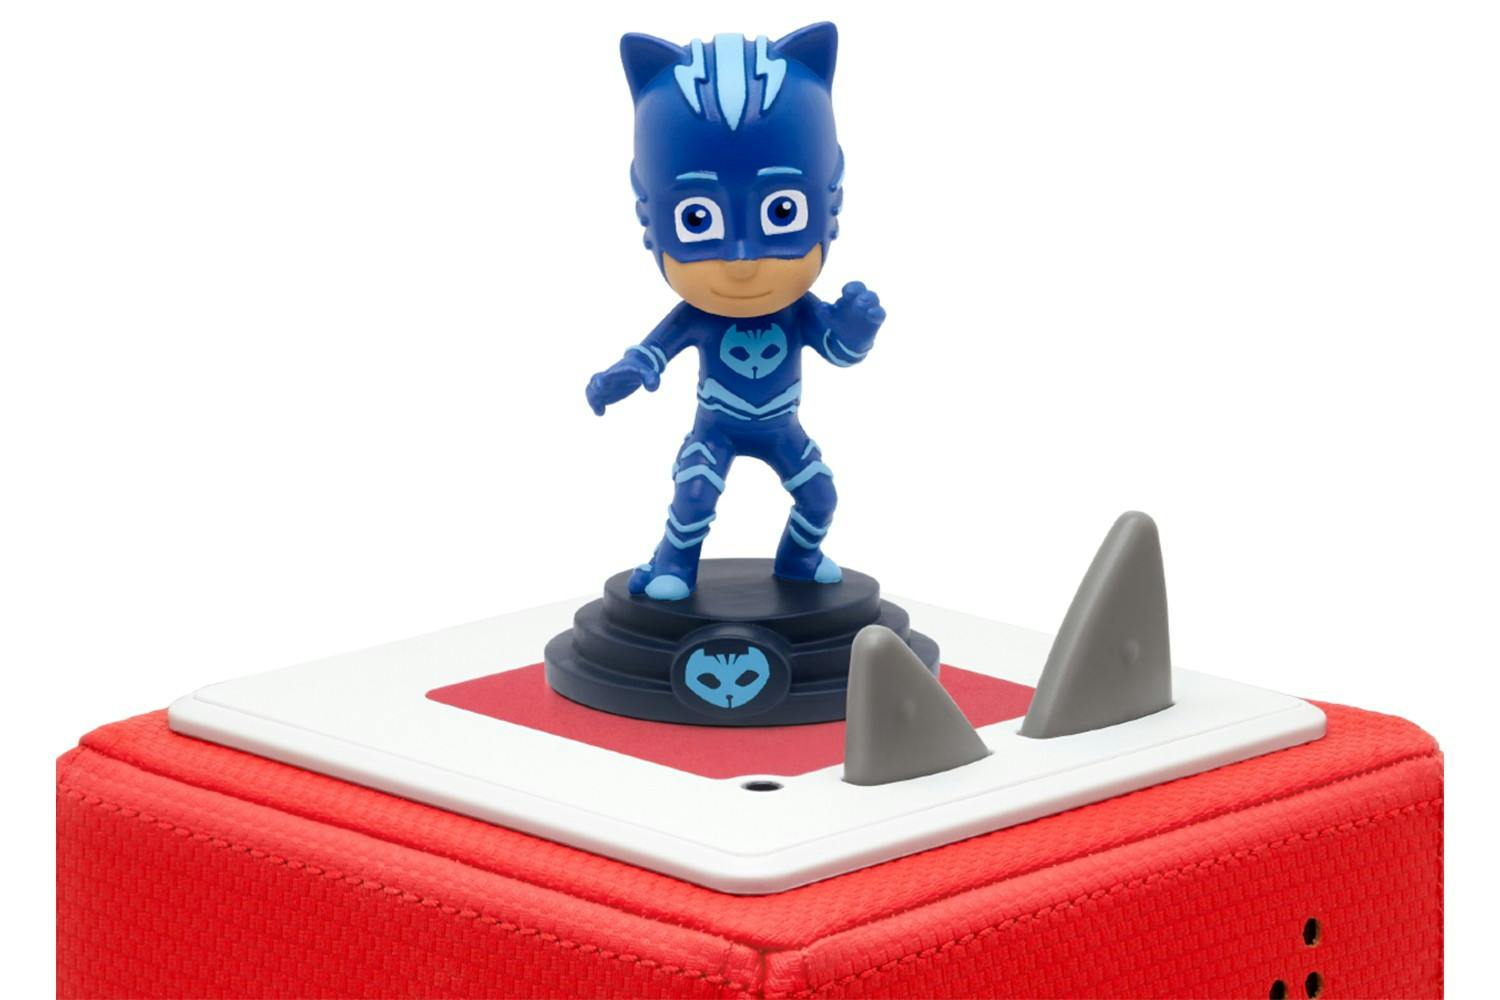 Augmented Reality Game for PJ Masks